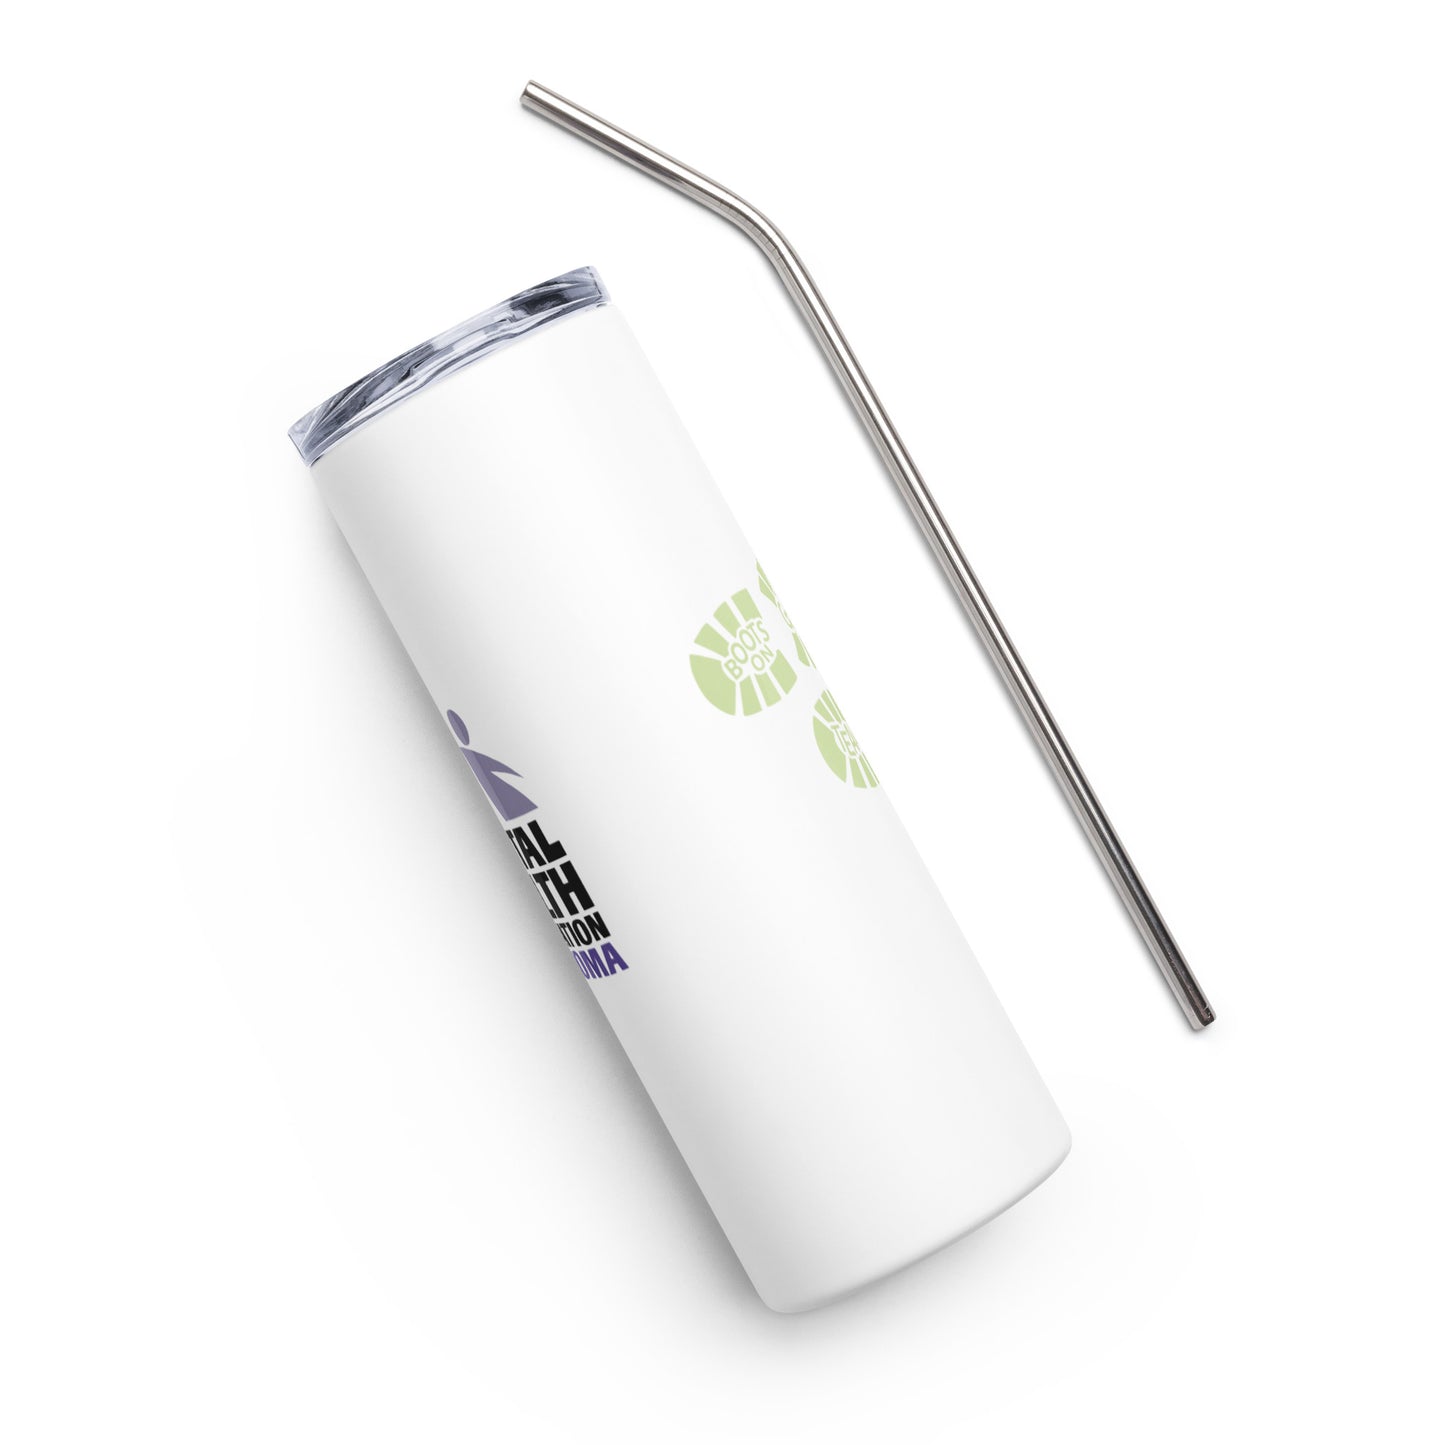 Boots on the Ground Stainless steel tumbler